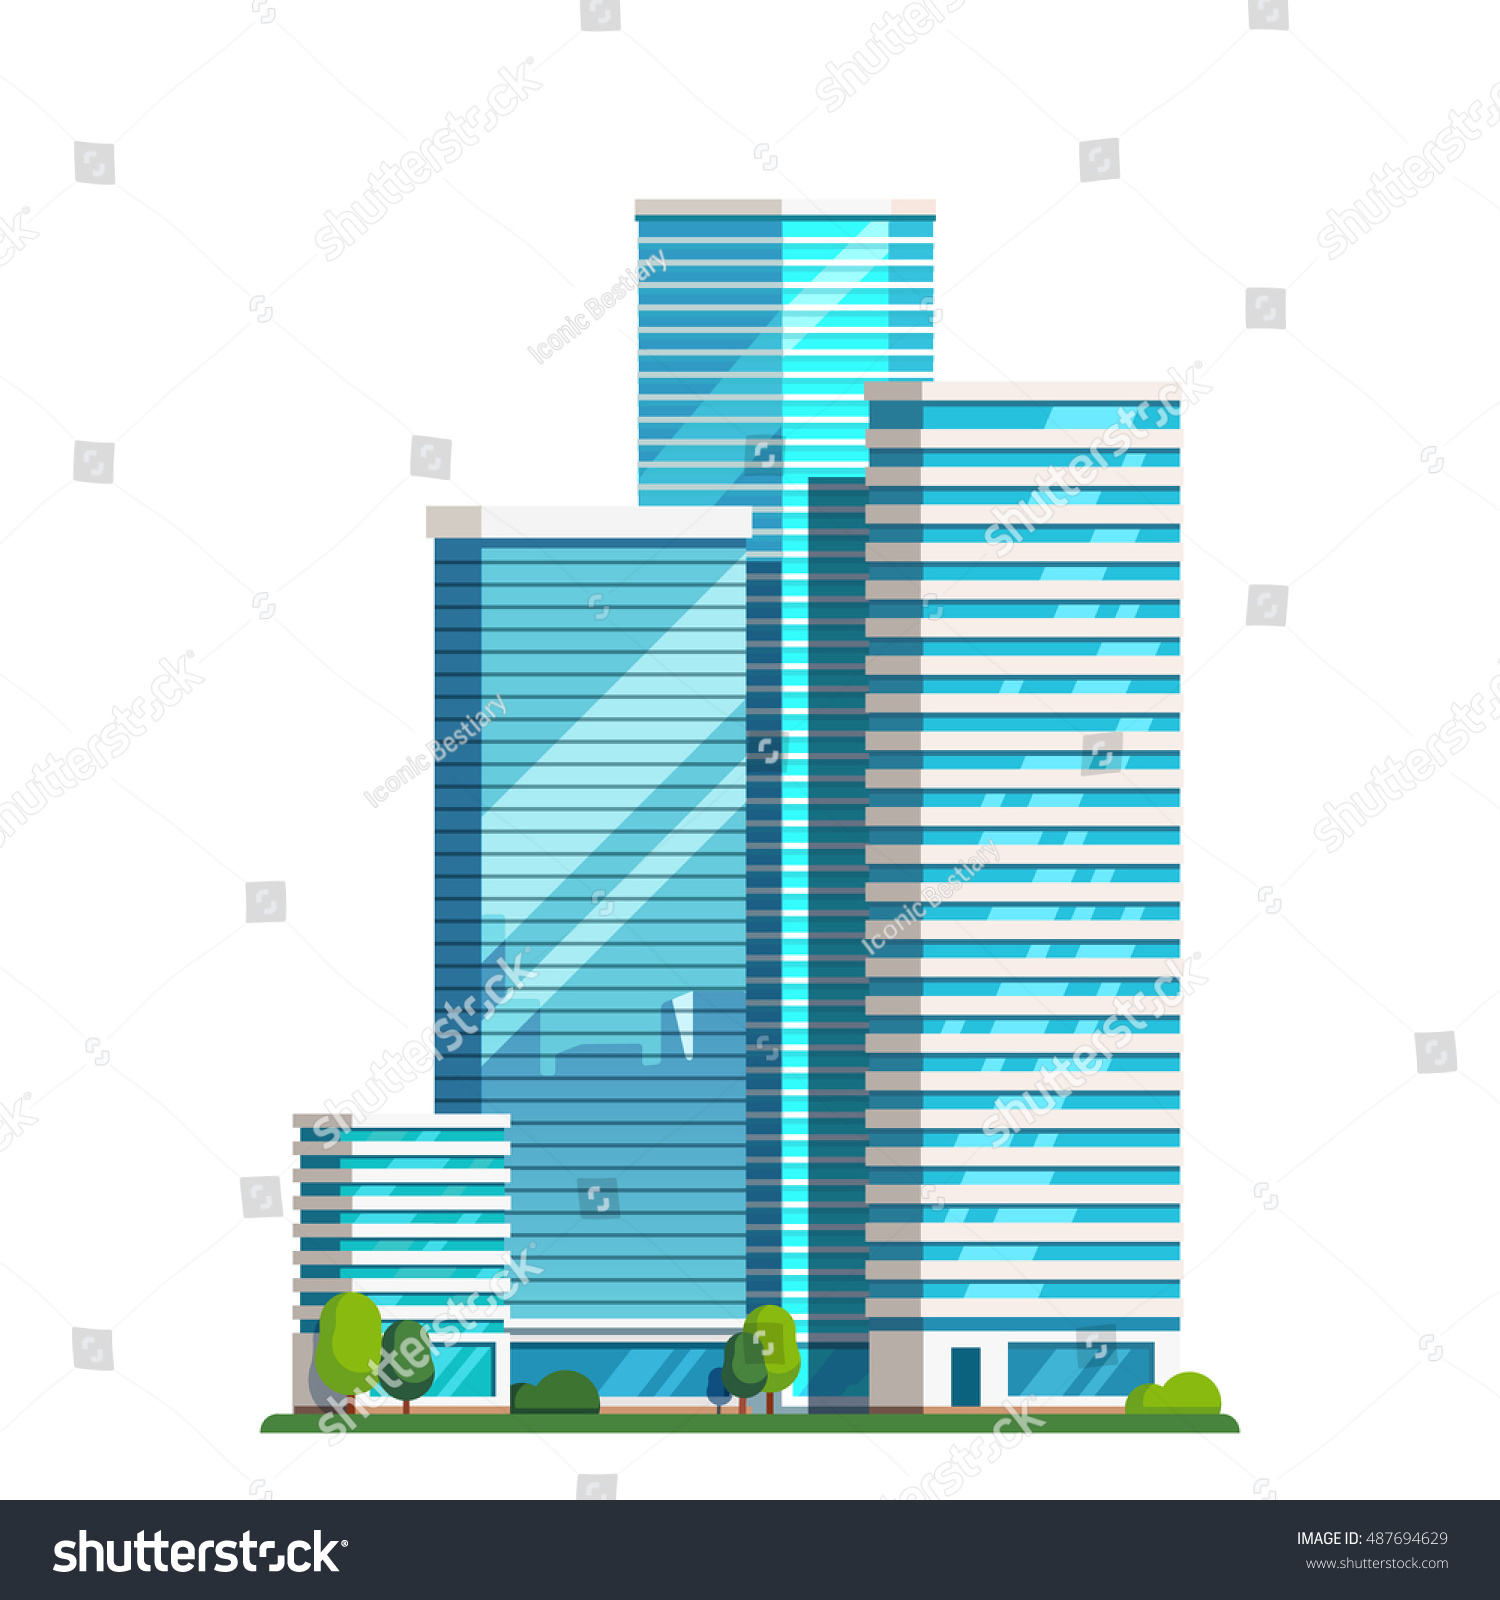 Downtown skyscrapers with skyline reflections on shiny glass facades. Modern flat style vector illustration isolated on white background. #487694629